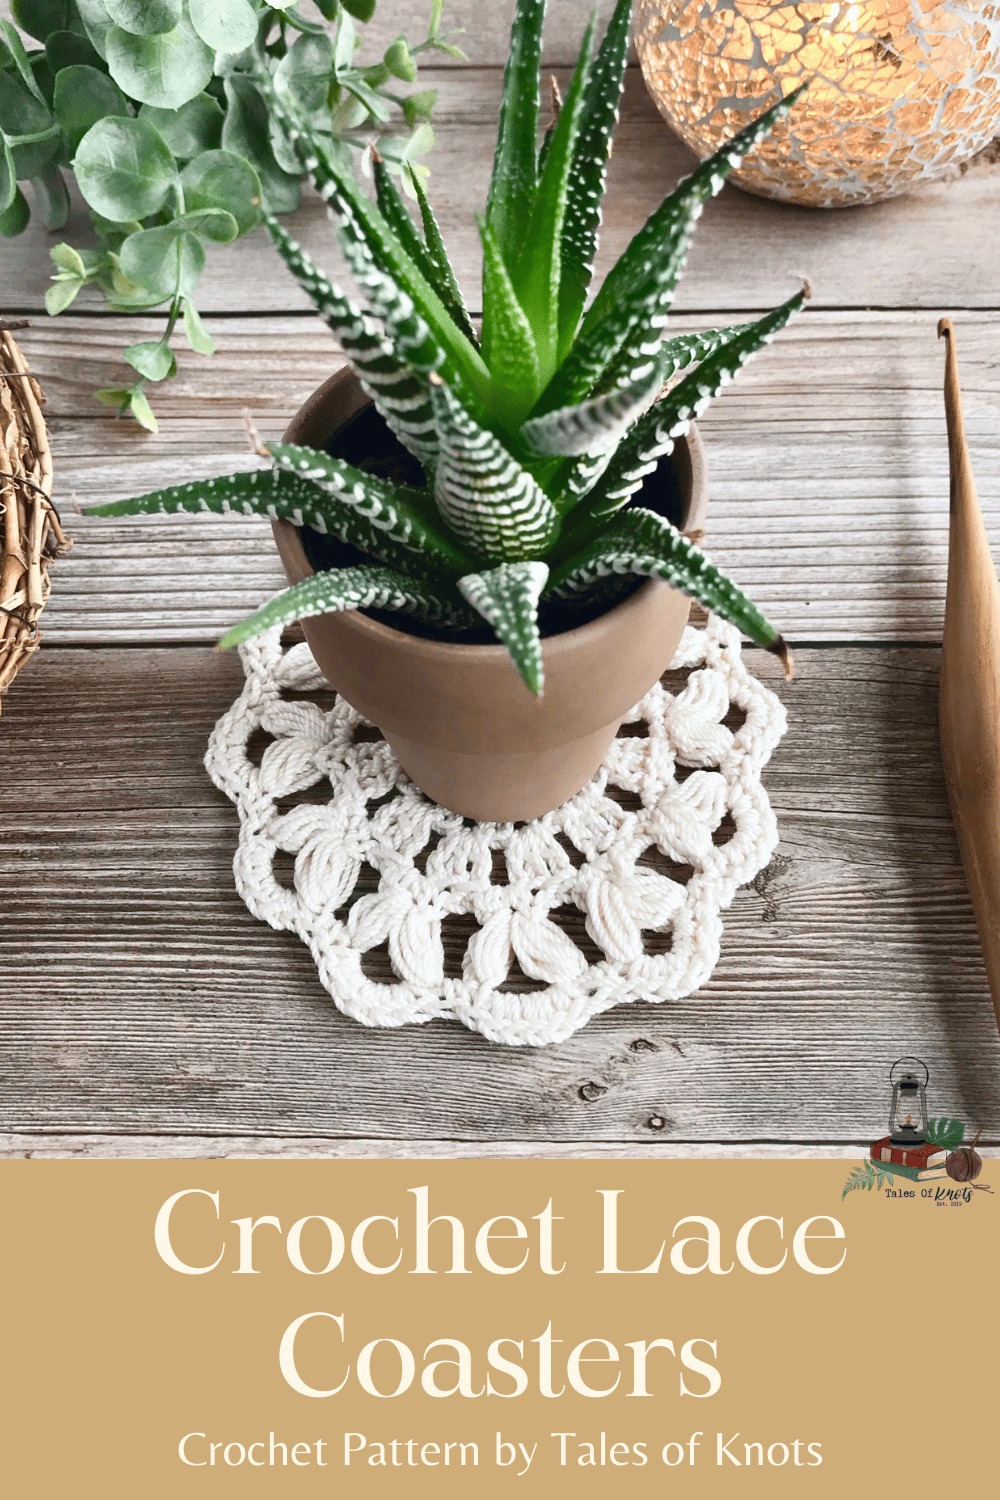 flatlay of crochet lace coasters with succulent in a clay pot